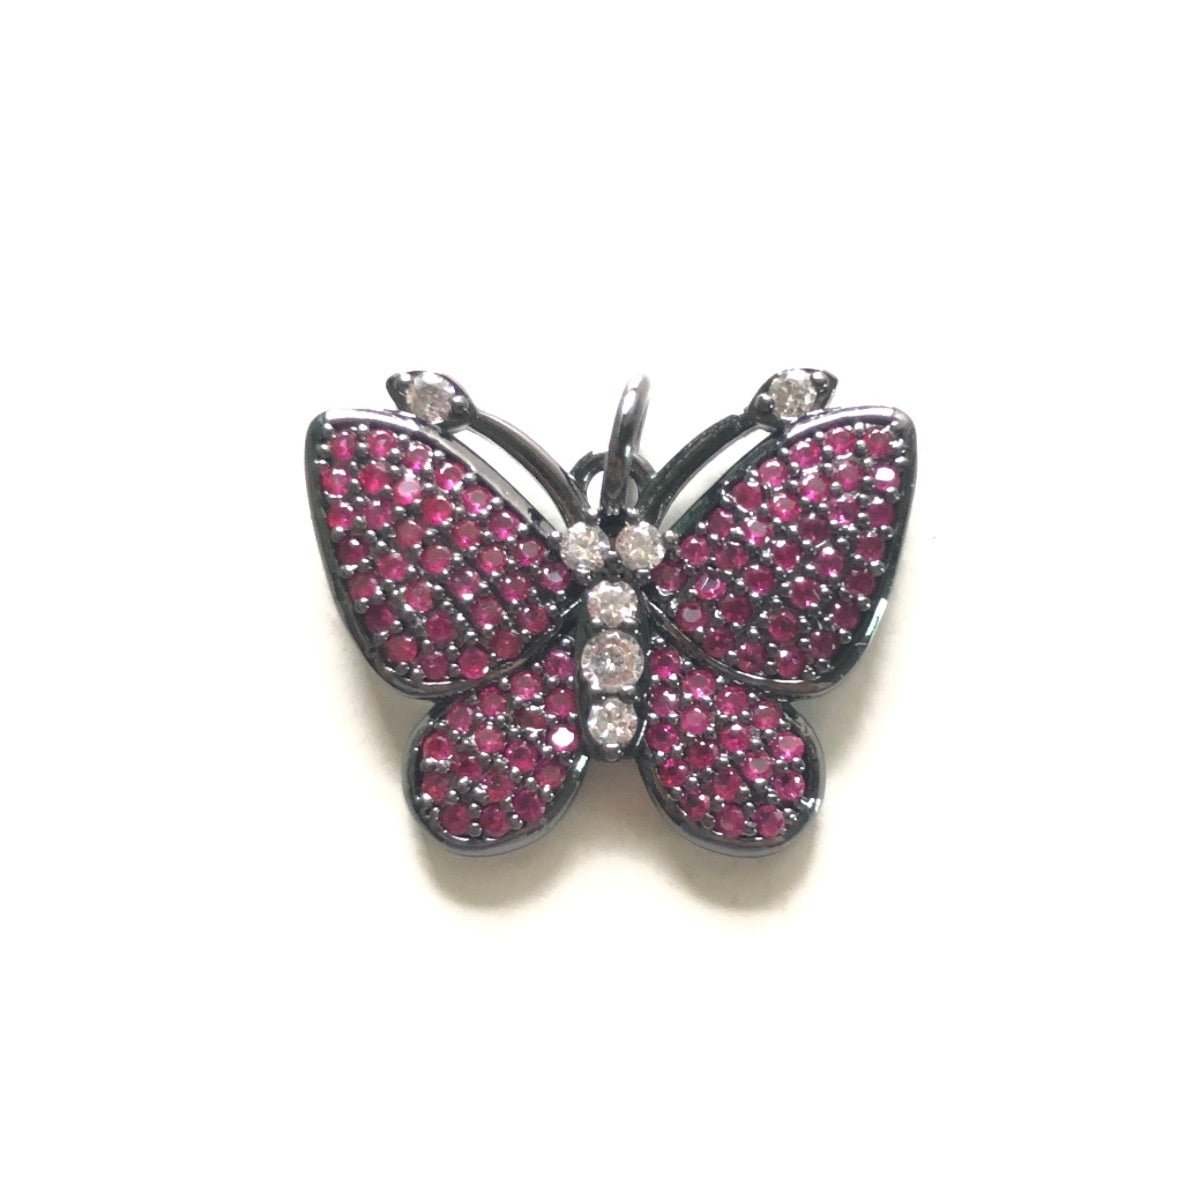 5pcs/lot 25*20mm Multicolor CZ Paved Butterfly Charms CZ Paved Charms Butterflies Colorful Zirconia New Charms Arrivals Charms Beads Beyond